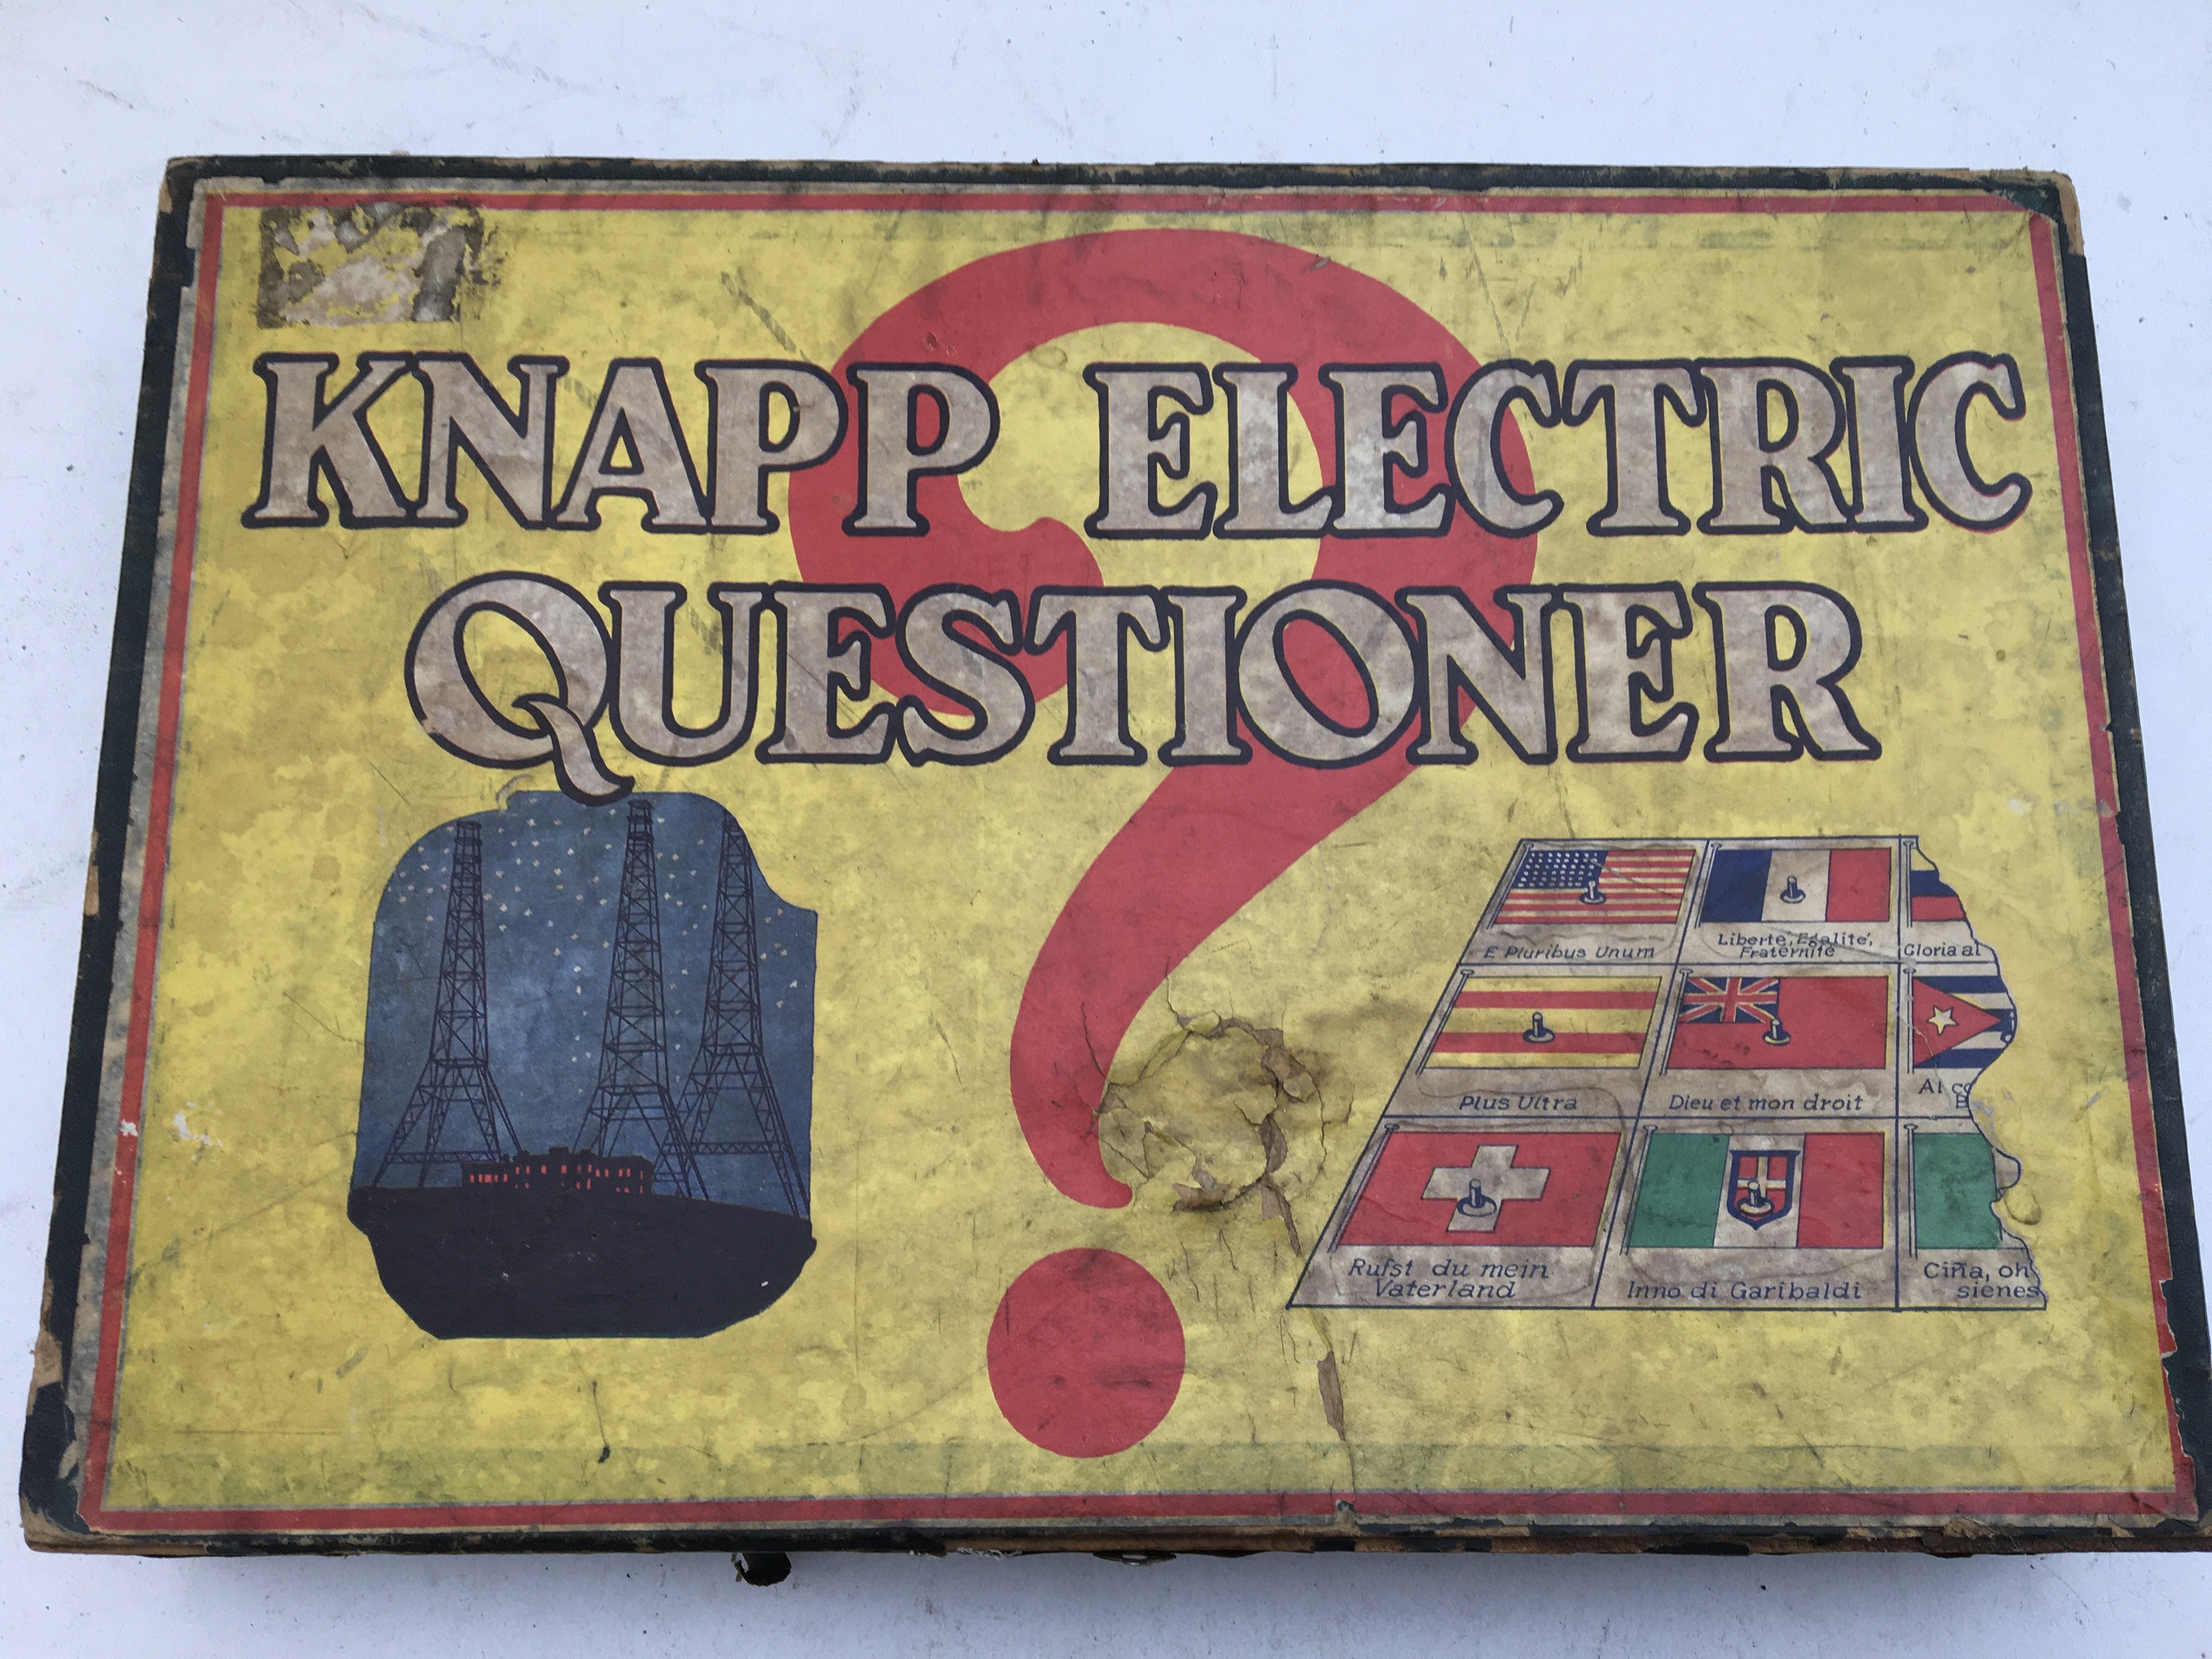 Knapp electric questioner, boxed 1950s toy - NO RESERVE